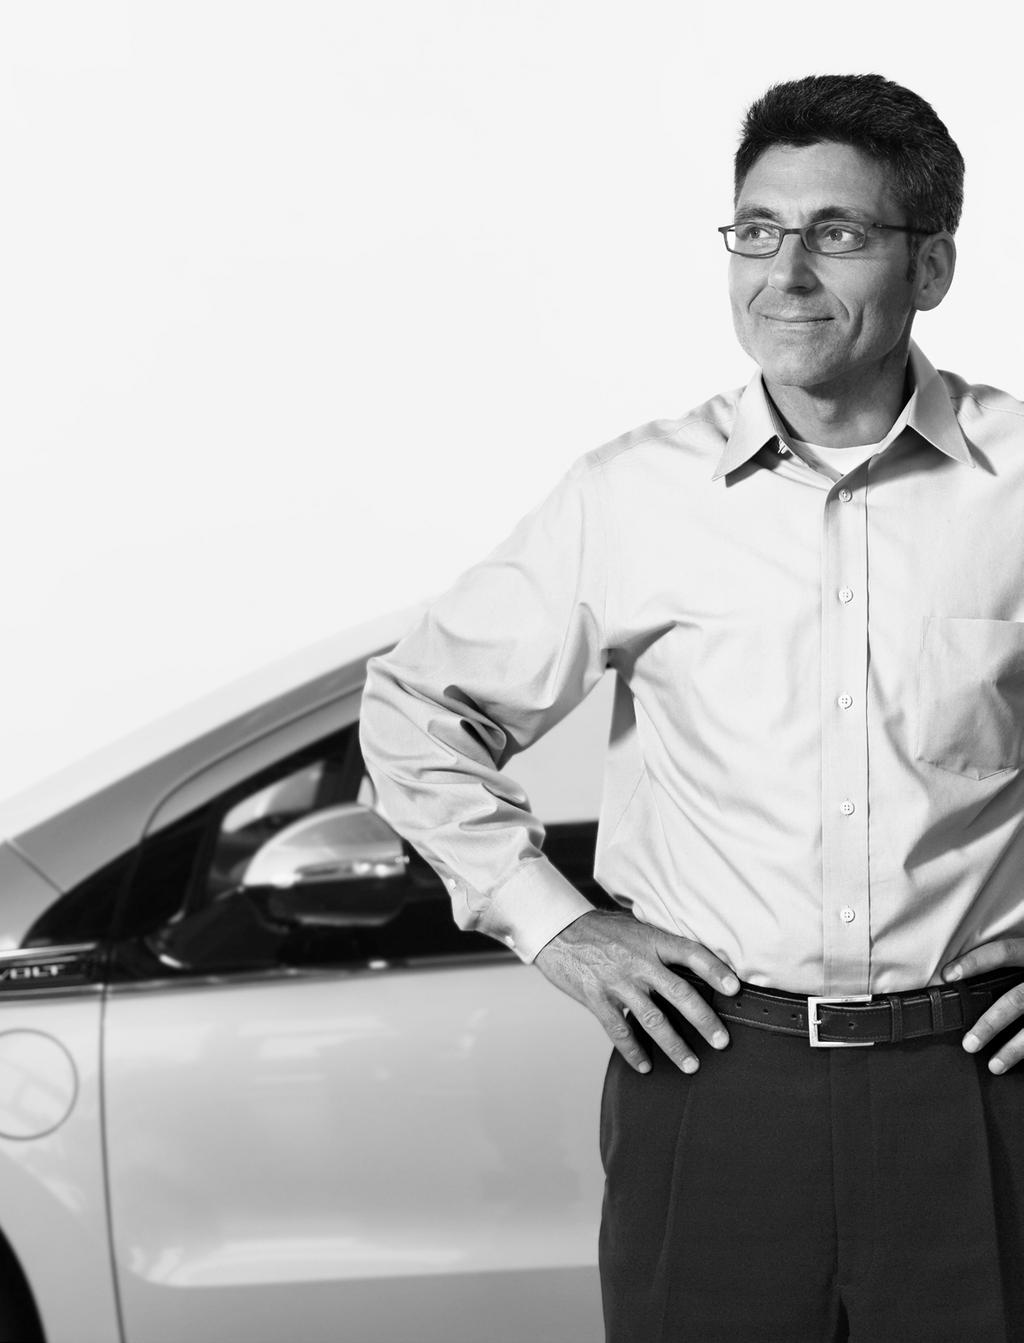 IformatioProvidedby: ANDREW FARAH VEHICLE CHIEF ENGINEER, Global ELECtRIC VEHICLEs Chagig he orld Volt is sigificatly differet from other electric vehicle cocepts because you have two oboard sources